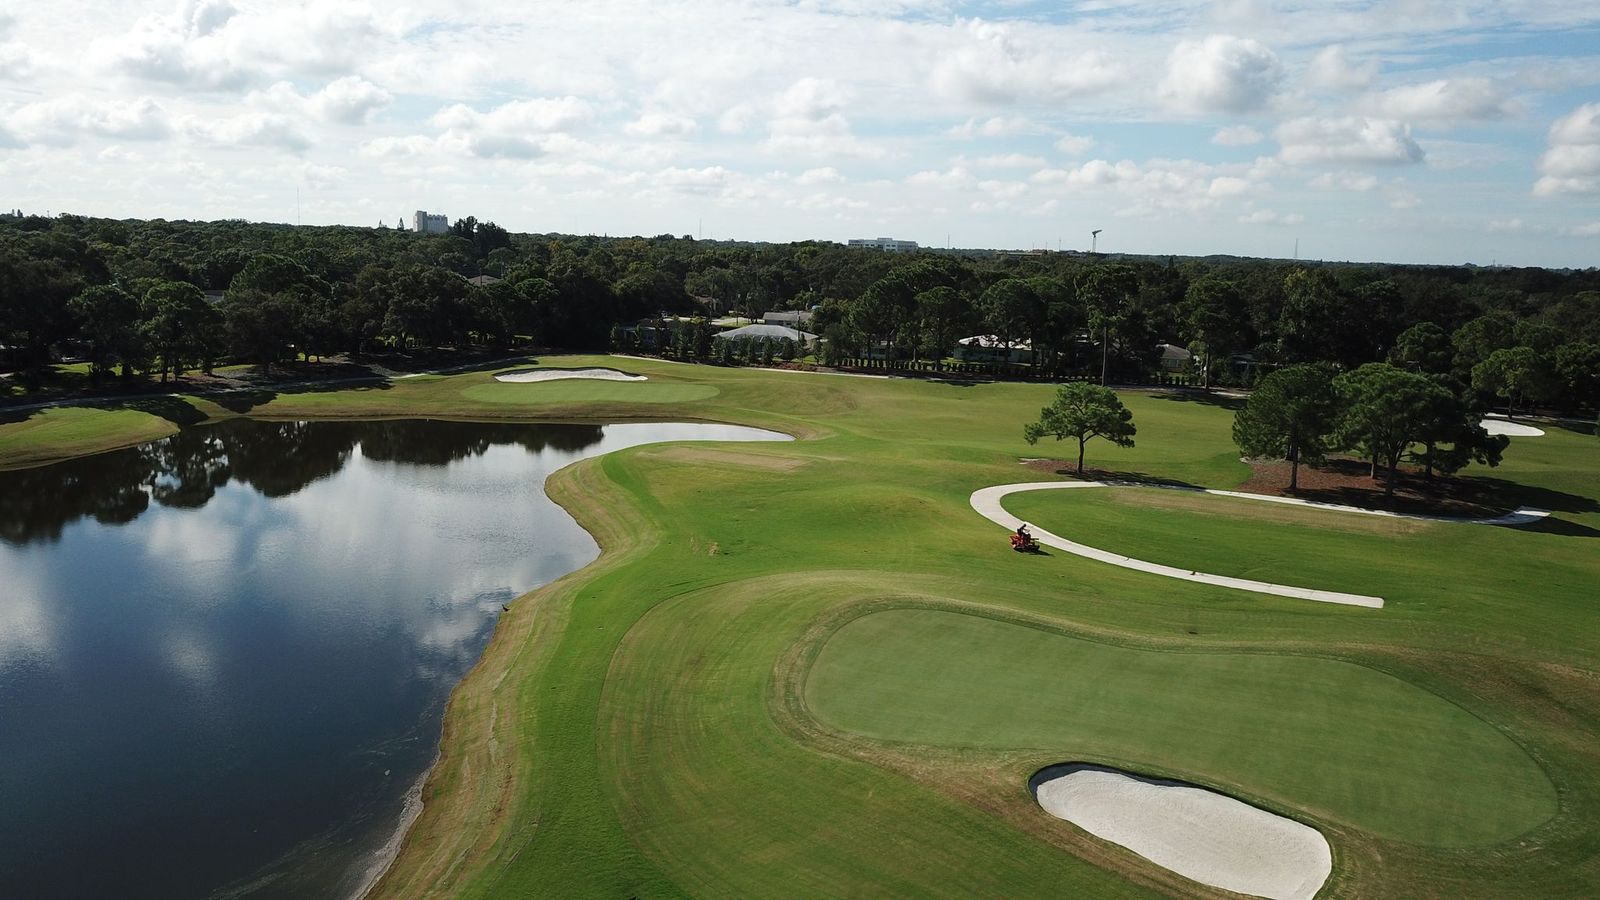 There is a lake on the golf course, as well as numerous clubhouses and a large number of trees